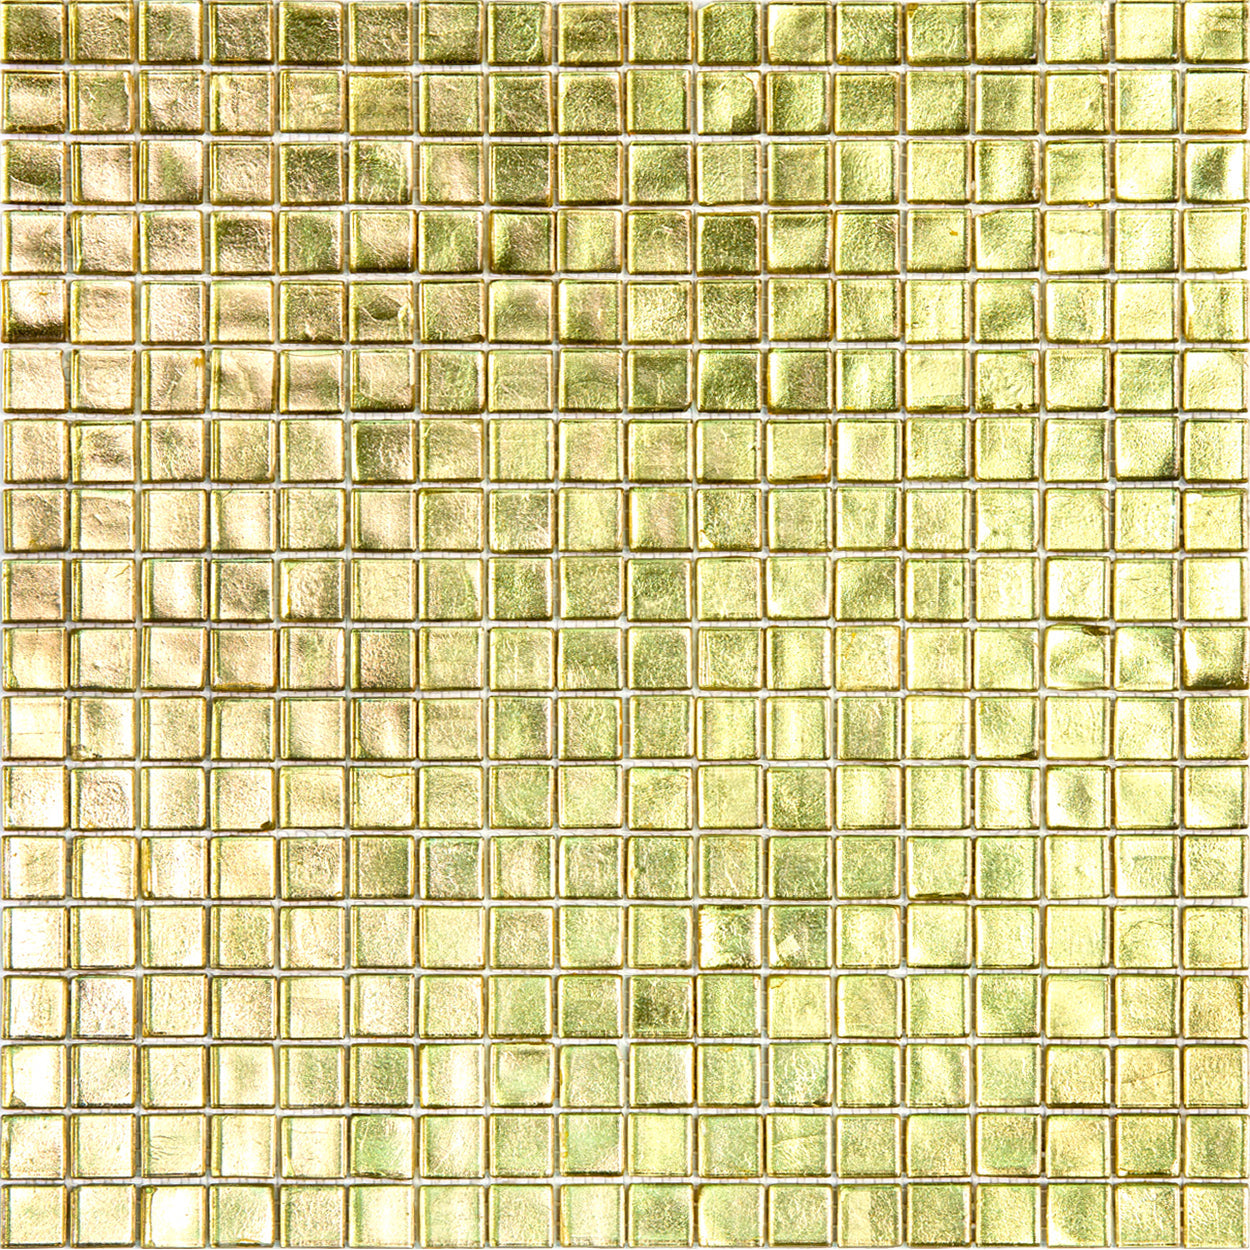 mir alma solid colors 0_6 inch nibble b65 wall and floor mosaic distributed by surface group natural materials